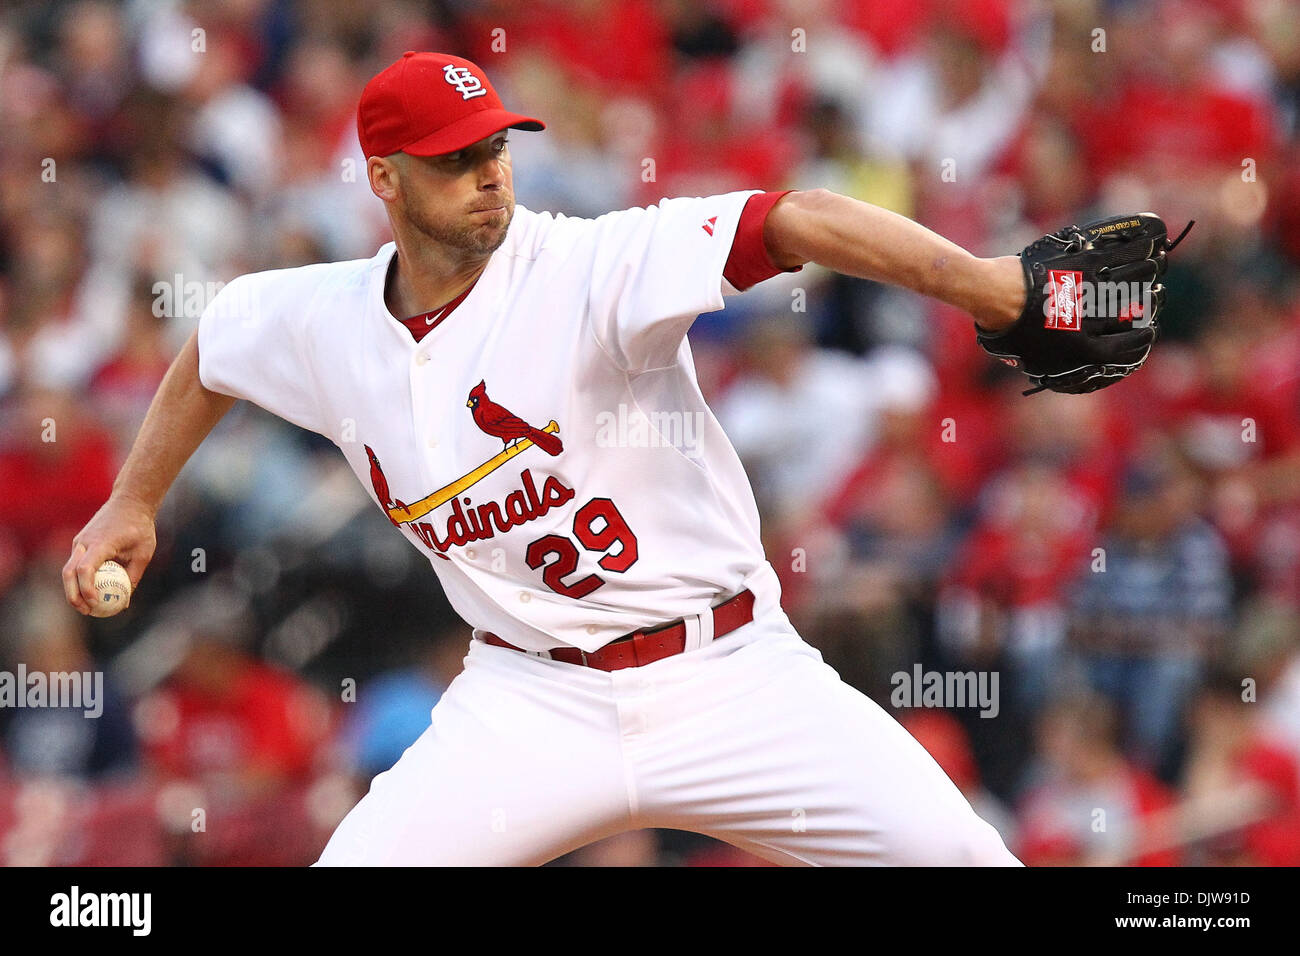 St. Louis Cardinals starting pitcher Chris Carpenter (29) digs into the  mound during the Cardinals game against the Washington Nationals at Busch  Stadium in St. Louis, Missouri. (Credit Image: © David Welker/Southcreek